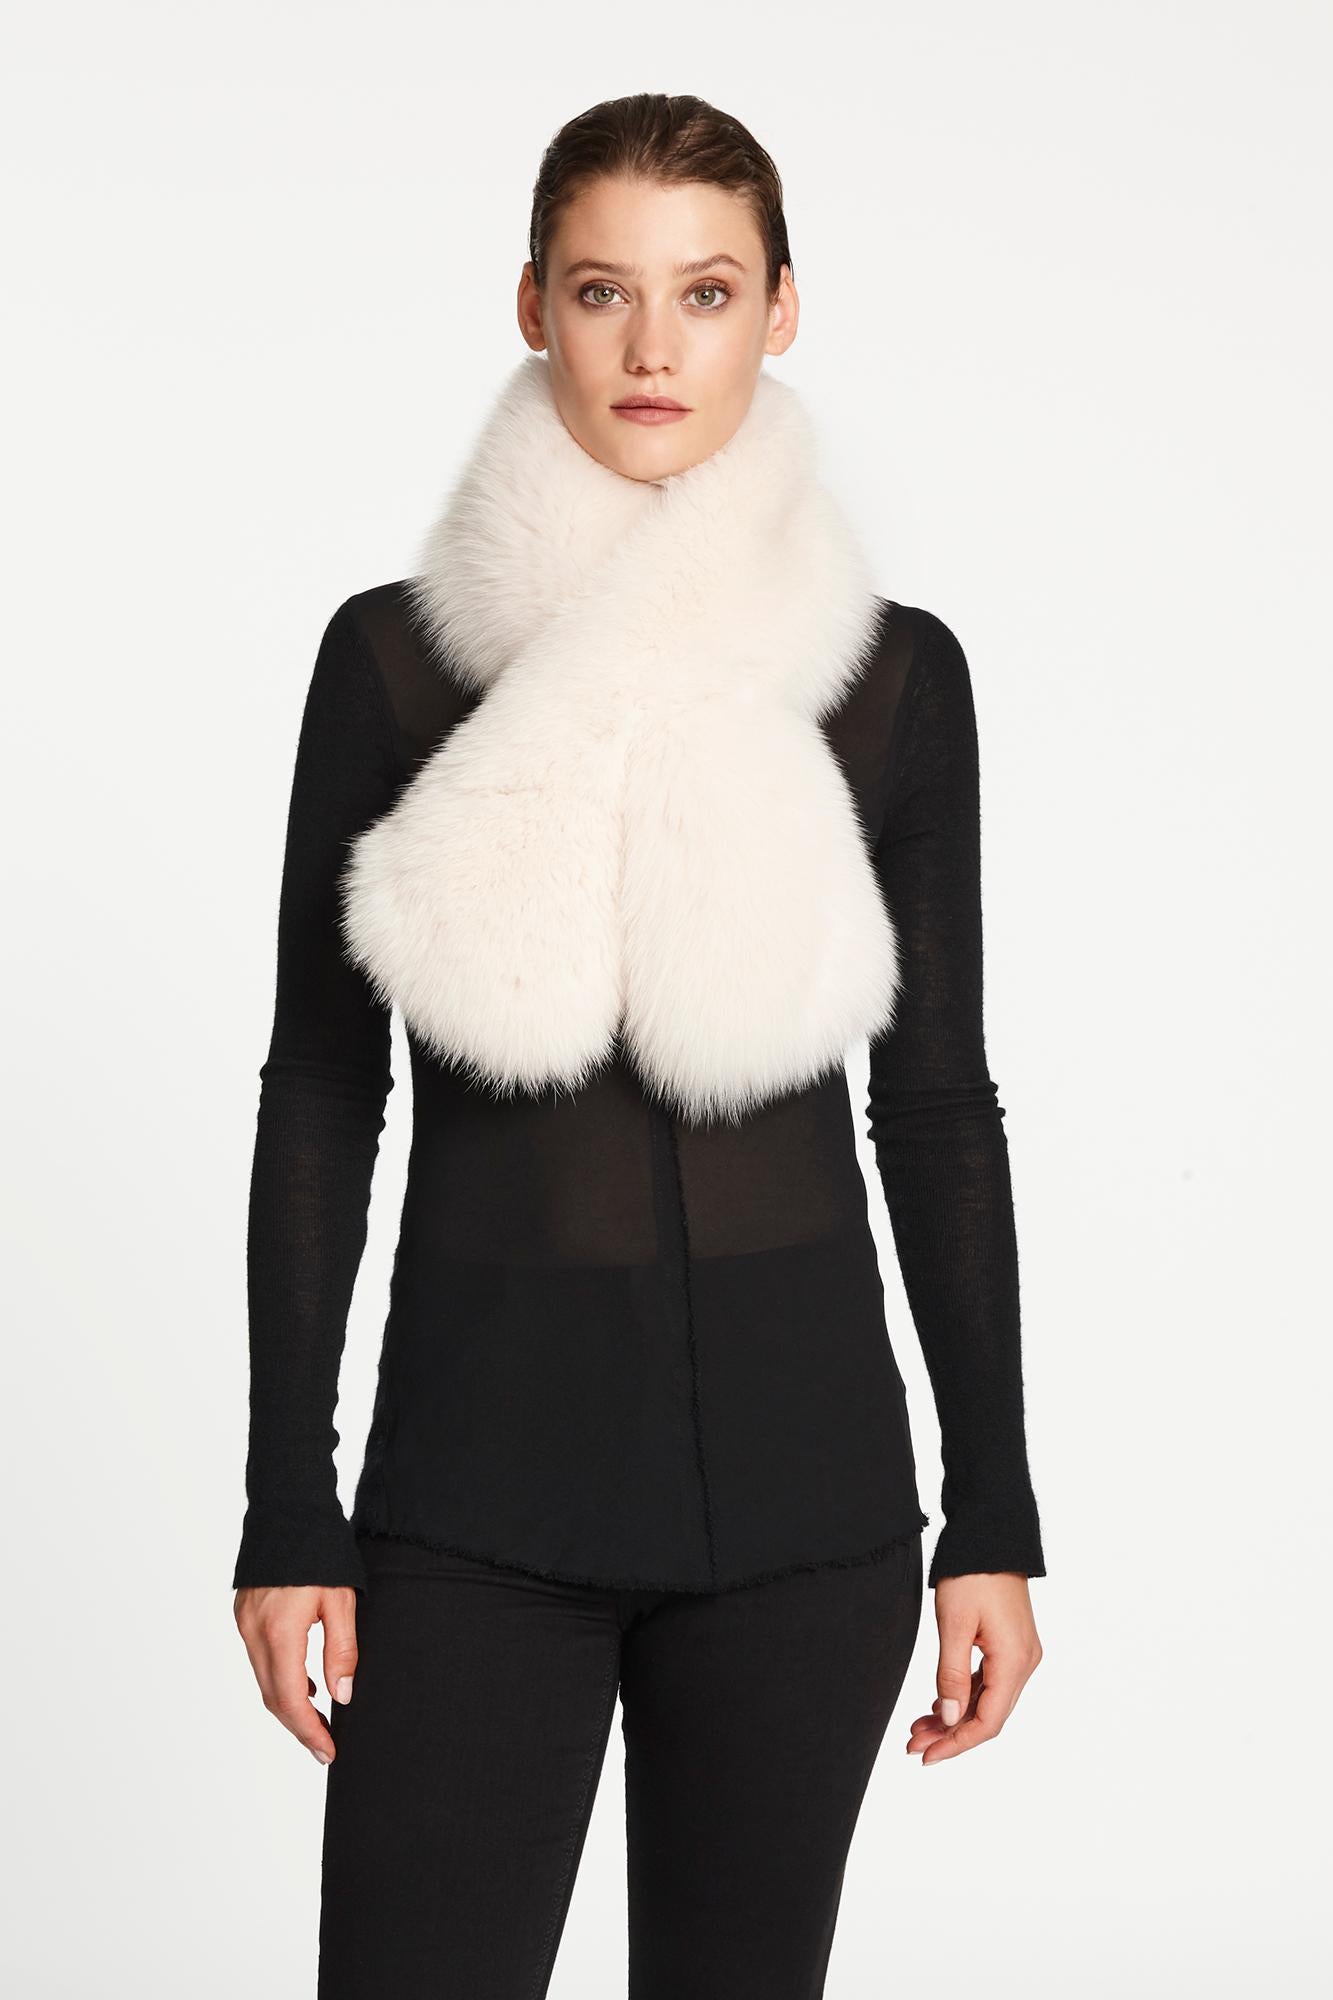 Verheyen London Lapel Cross-through Collar in Pearl White Fox Fur  

Brand new RRP Price 

The Lapel Cross-through Collar is Verheyen London’s casual everyday design, which is perfectly shaped to wear over any outfit.  Designed for layering, this